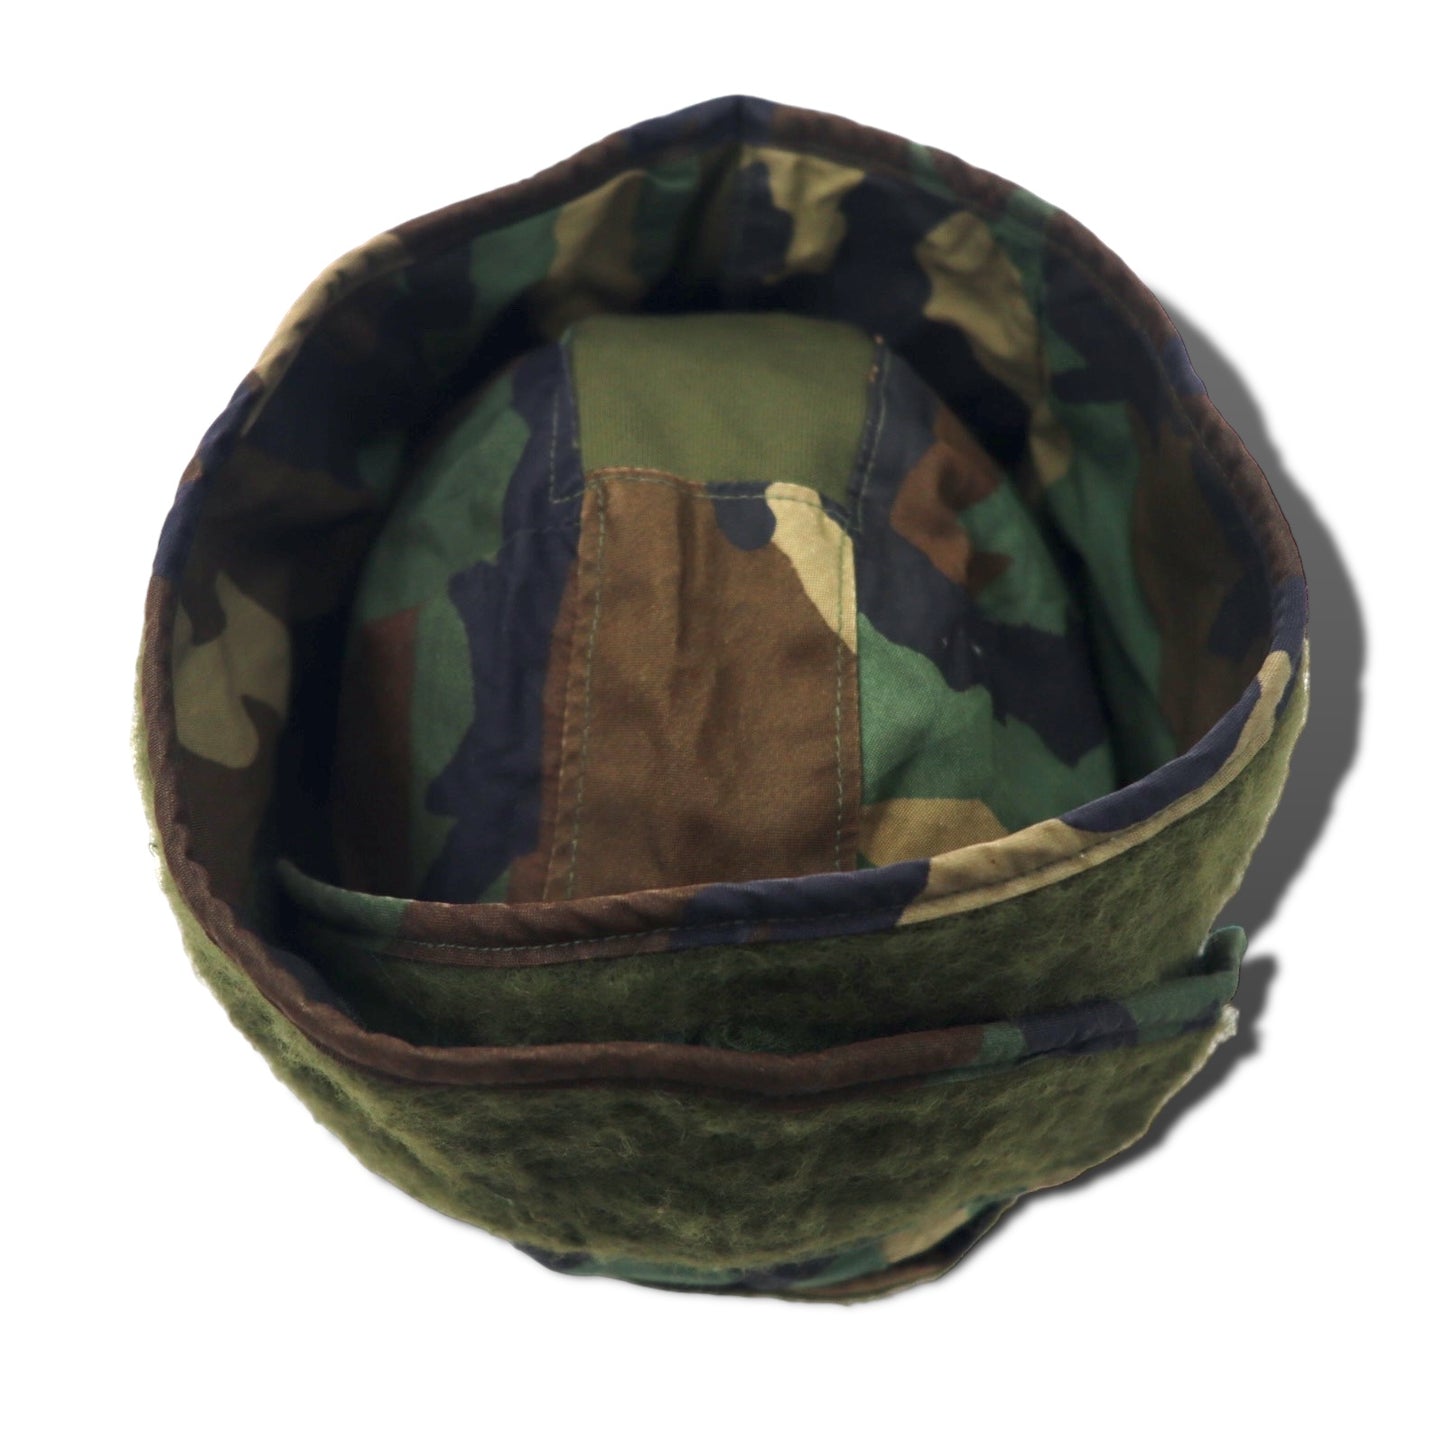 US ARMY 米軍 フライトキャップ ヘルメットライナーキャップ M-65 57.7cm カーキ カモフラ コットン ミリタリー CAP COLD WEATHER INSULATING HELMET LINER WOODLAND CAMOUFLAGE 8415-01-099-7846 PROTECTIVE APPAREL CORP OF AMERICA